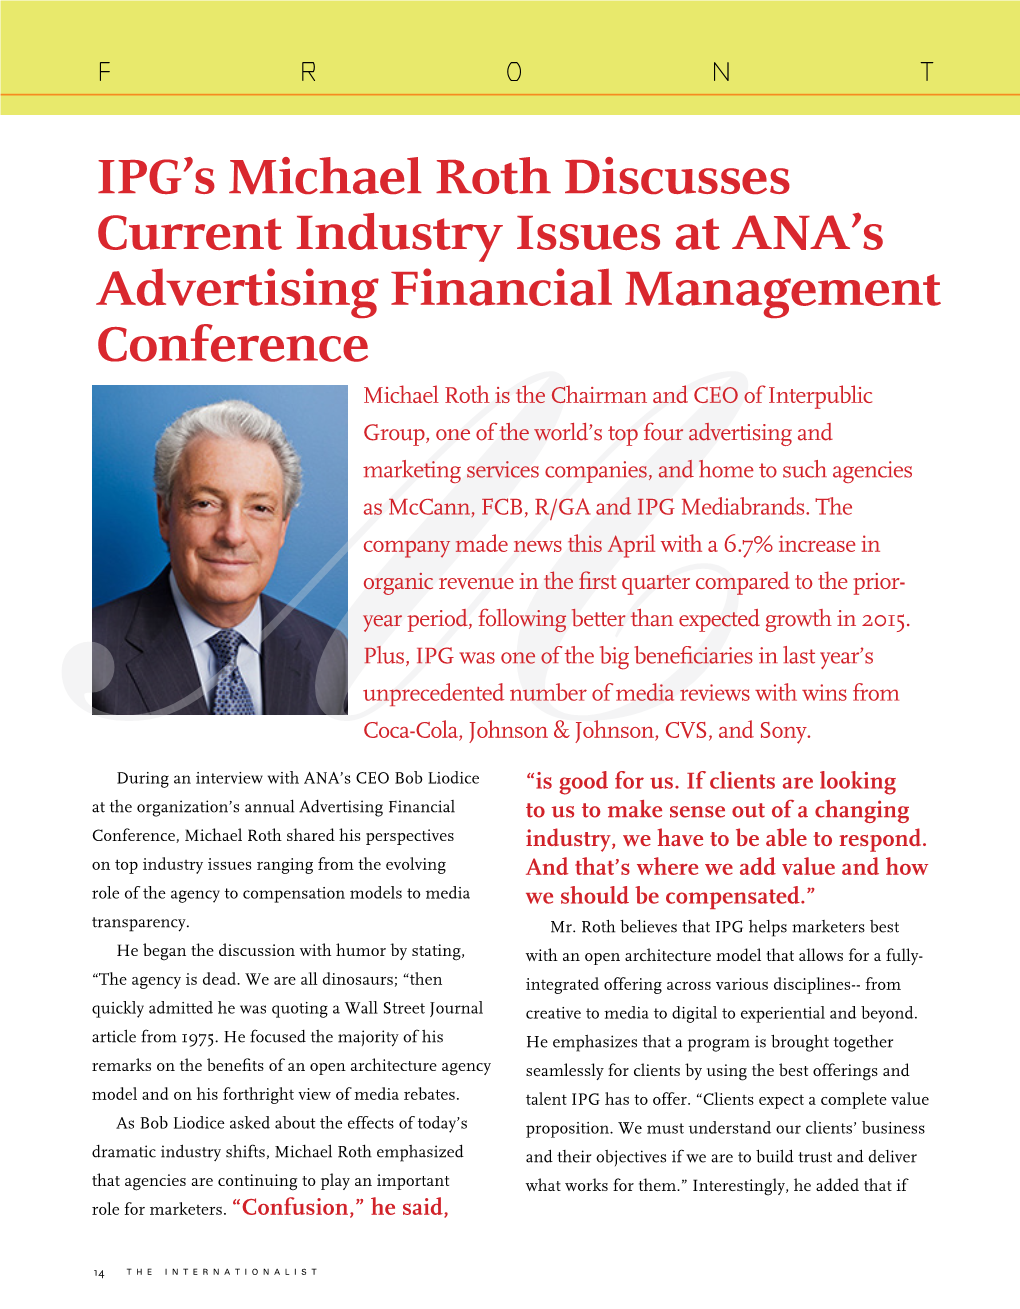 IPG's Michael Roth Discusses Current Industry Issues at ANA's Advertising